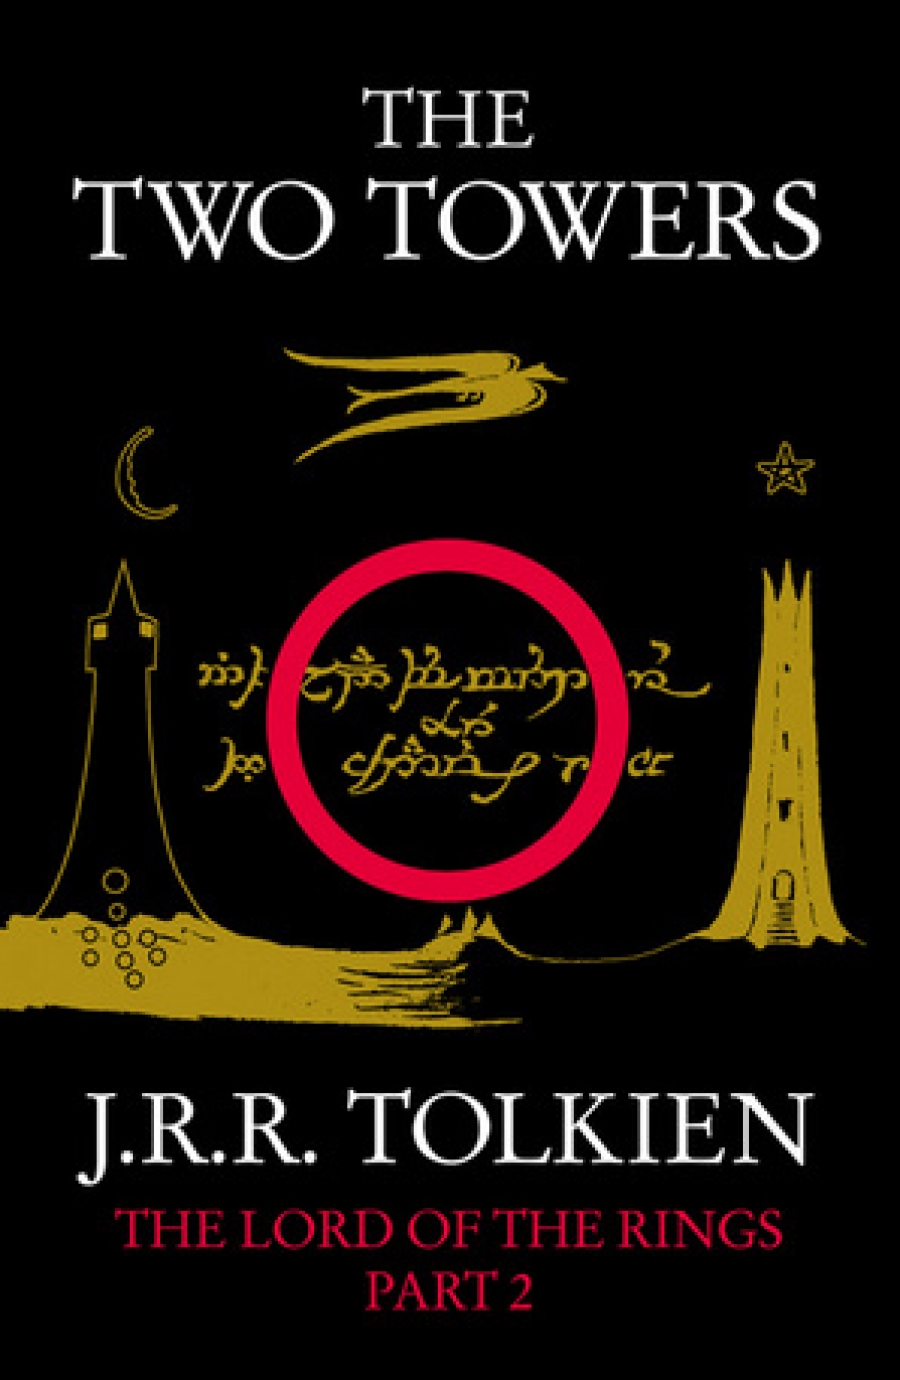 Tolkien, J.R.R. The Two Towers 